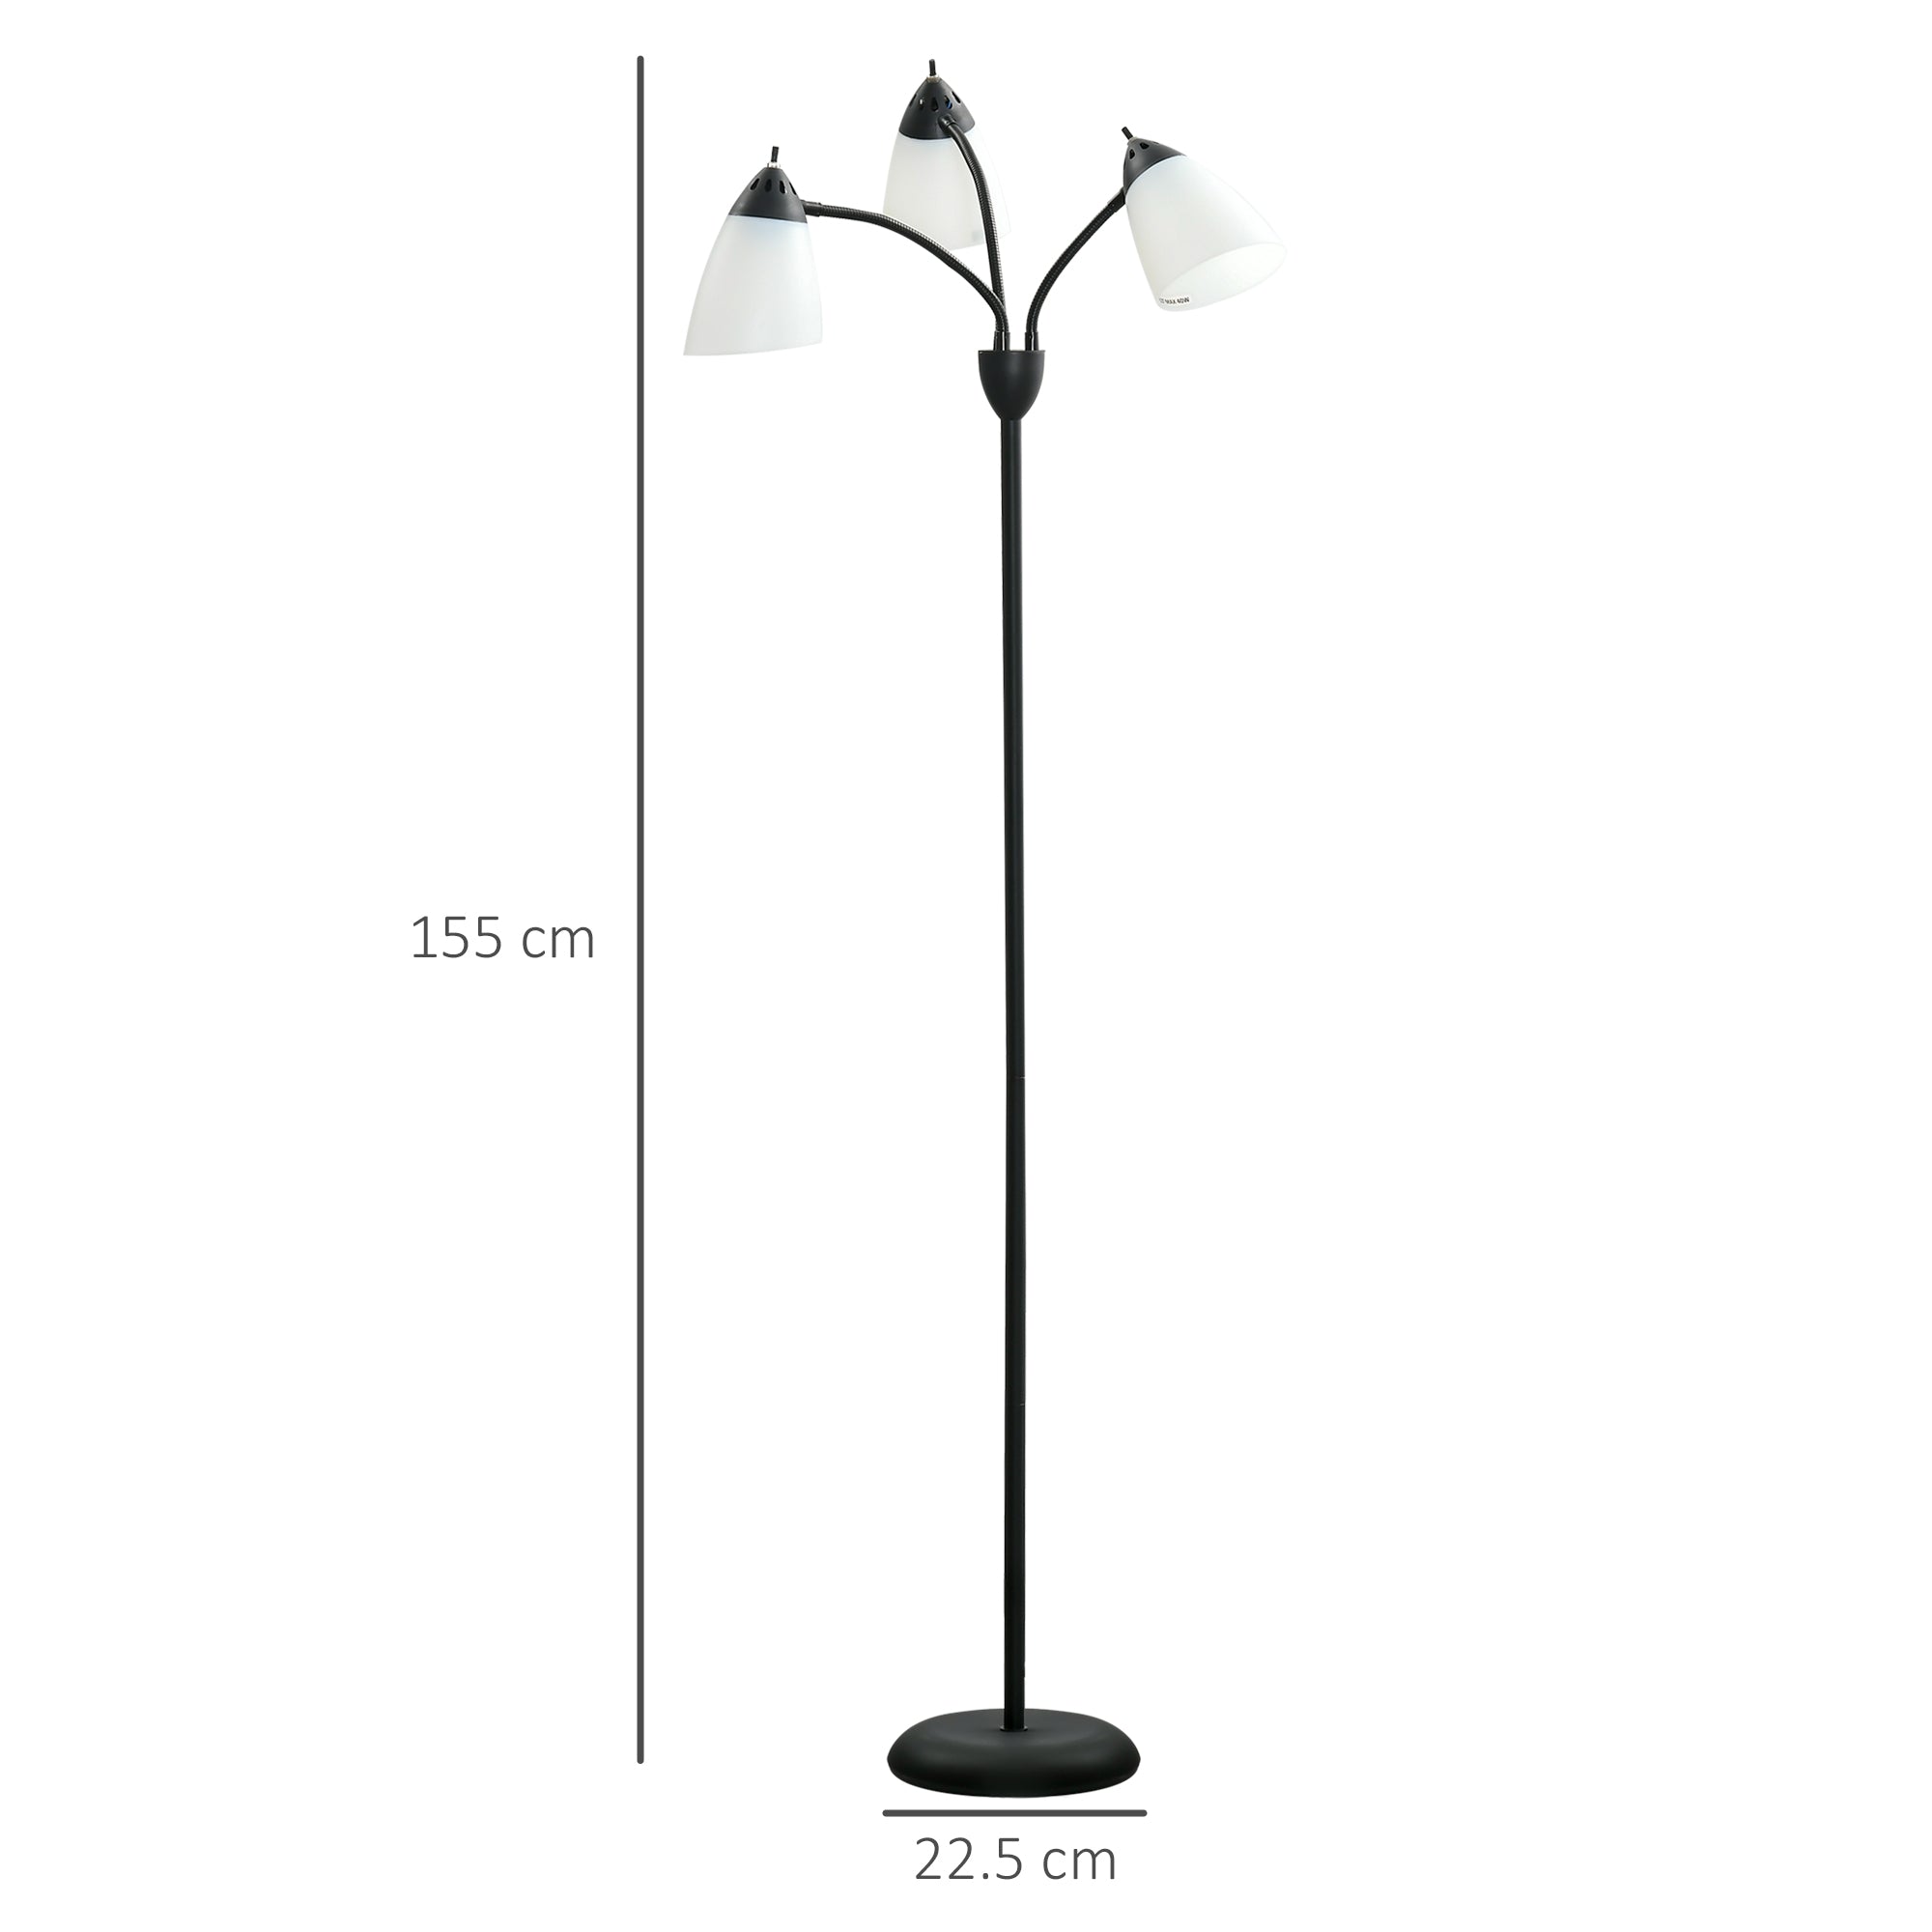 Arc Tree Floor Lamp with 3 Adjustable Rotating Lights, for Bedroom Living Room, Industrial Standing Lamp with Steel Frame, Black  AOSOM   